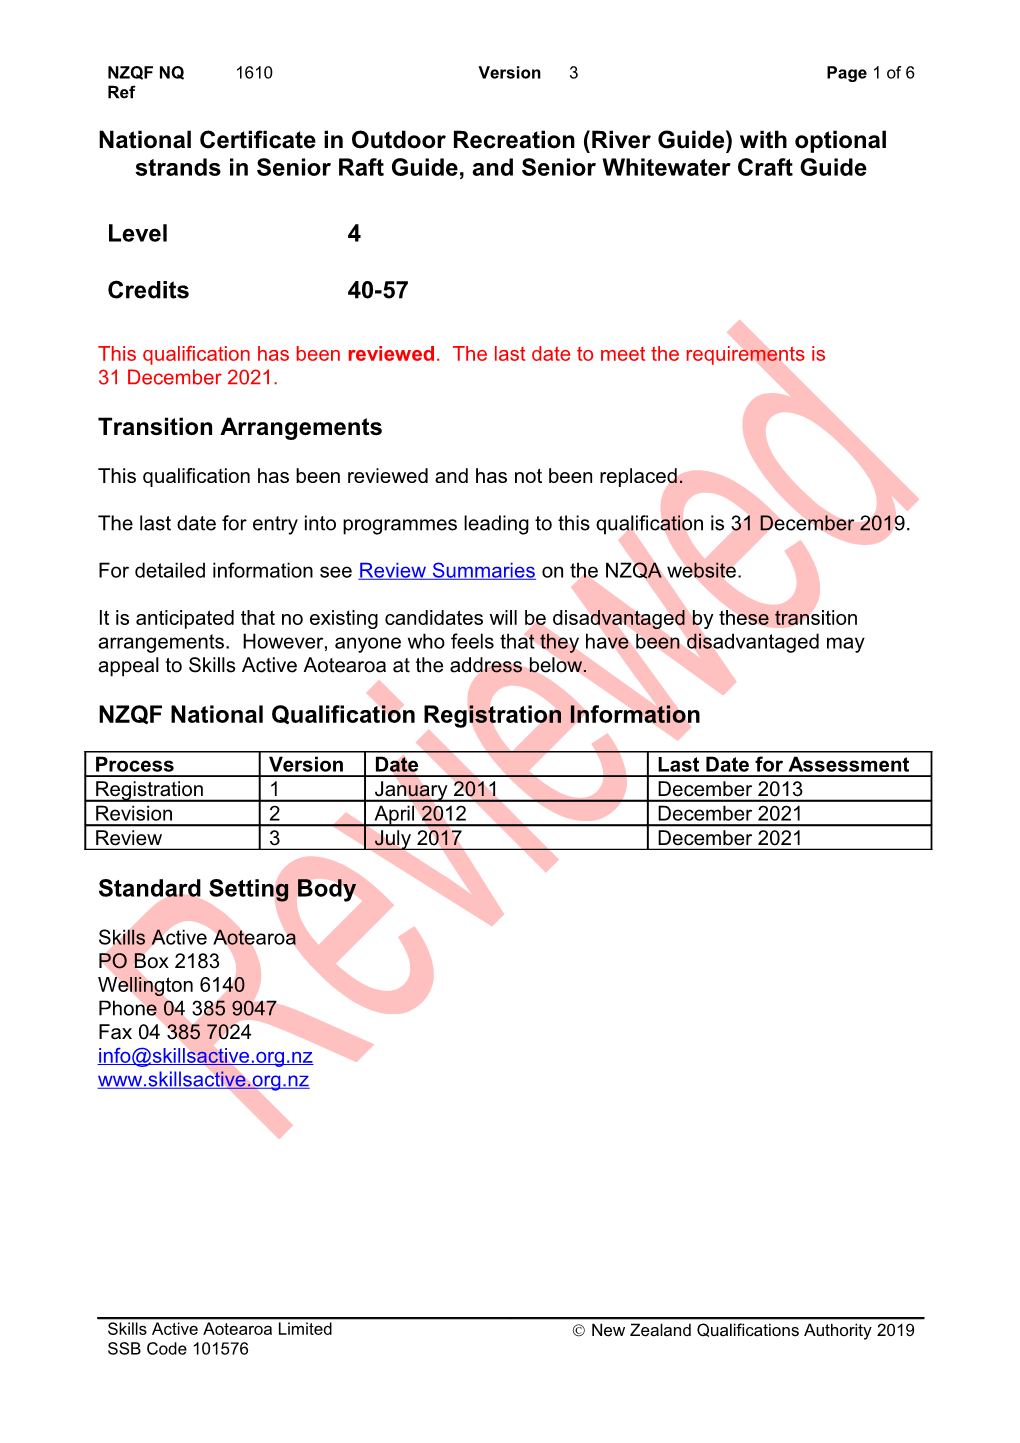 1610 National Certificate in Outdoor Recreation (River Guide) with Optional Strands In